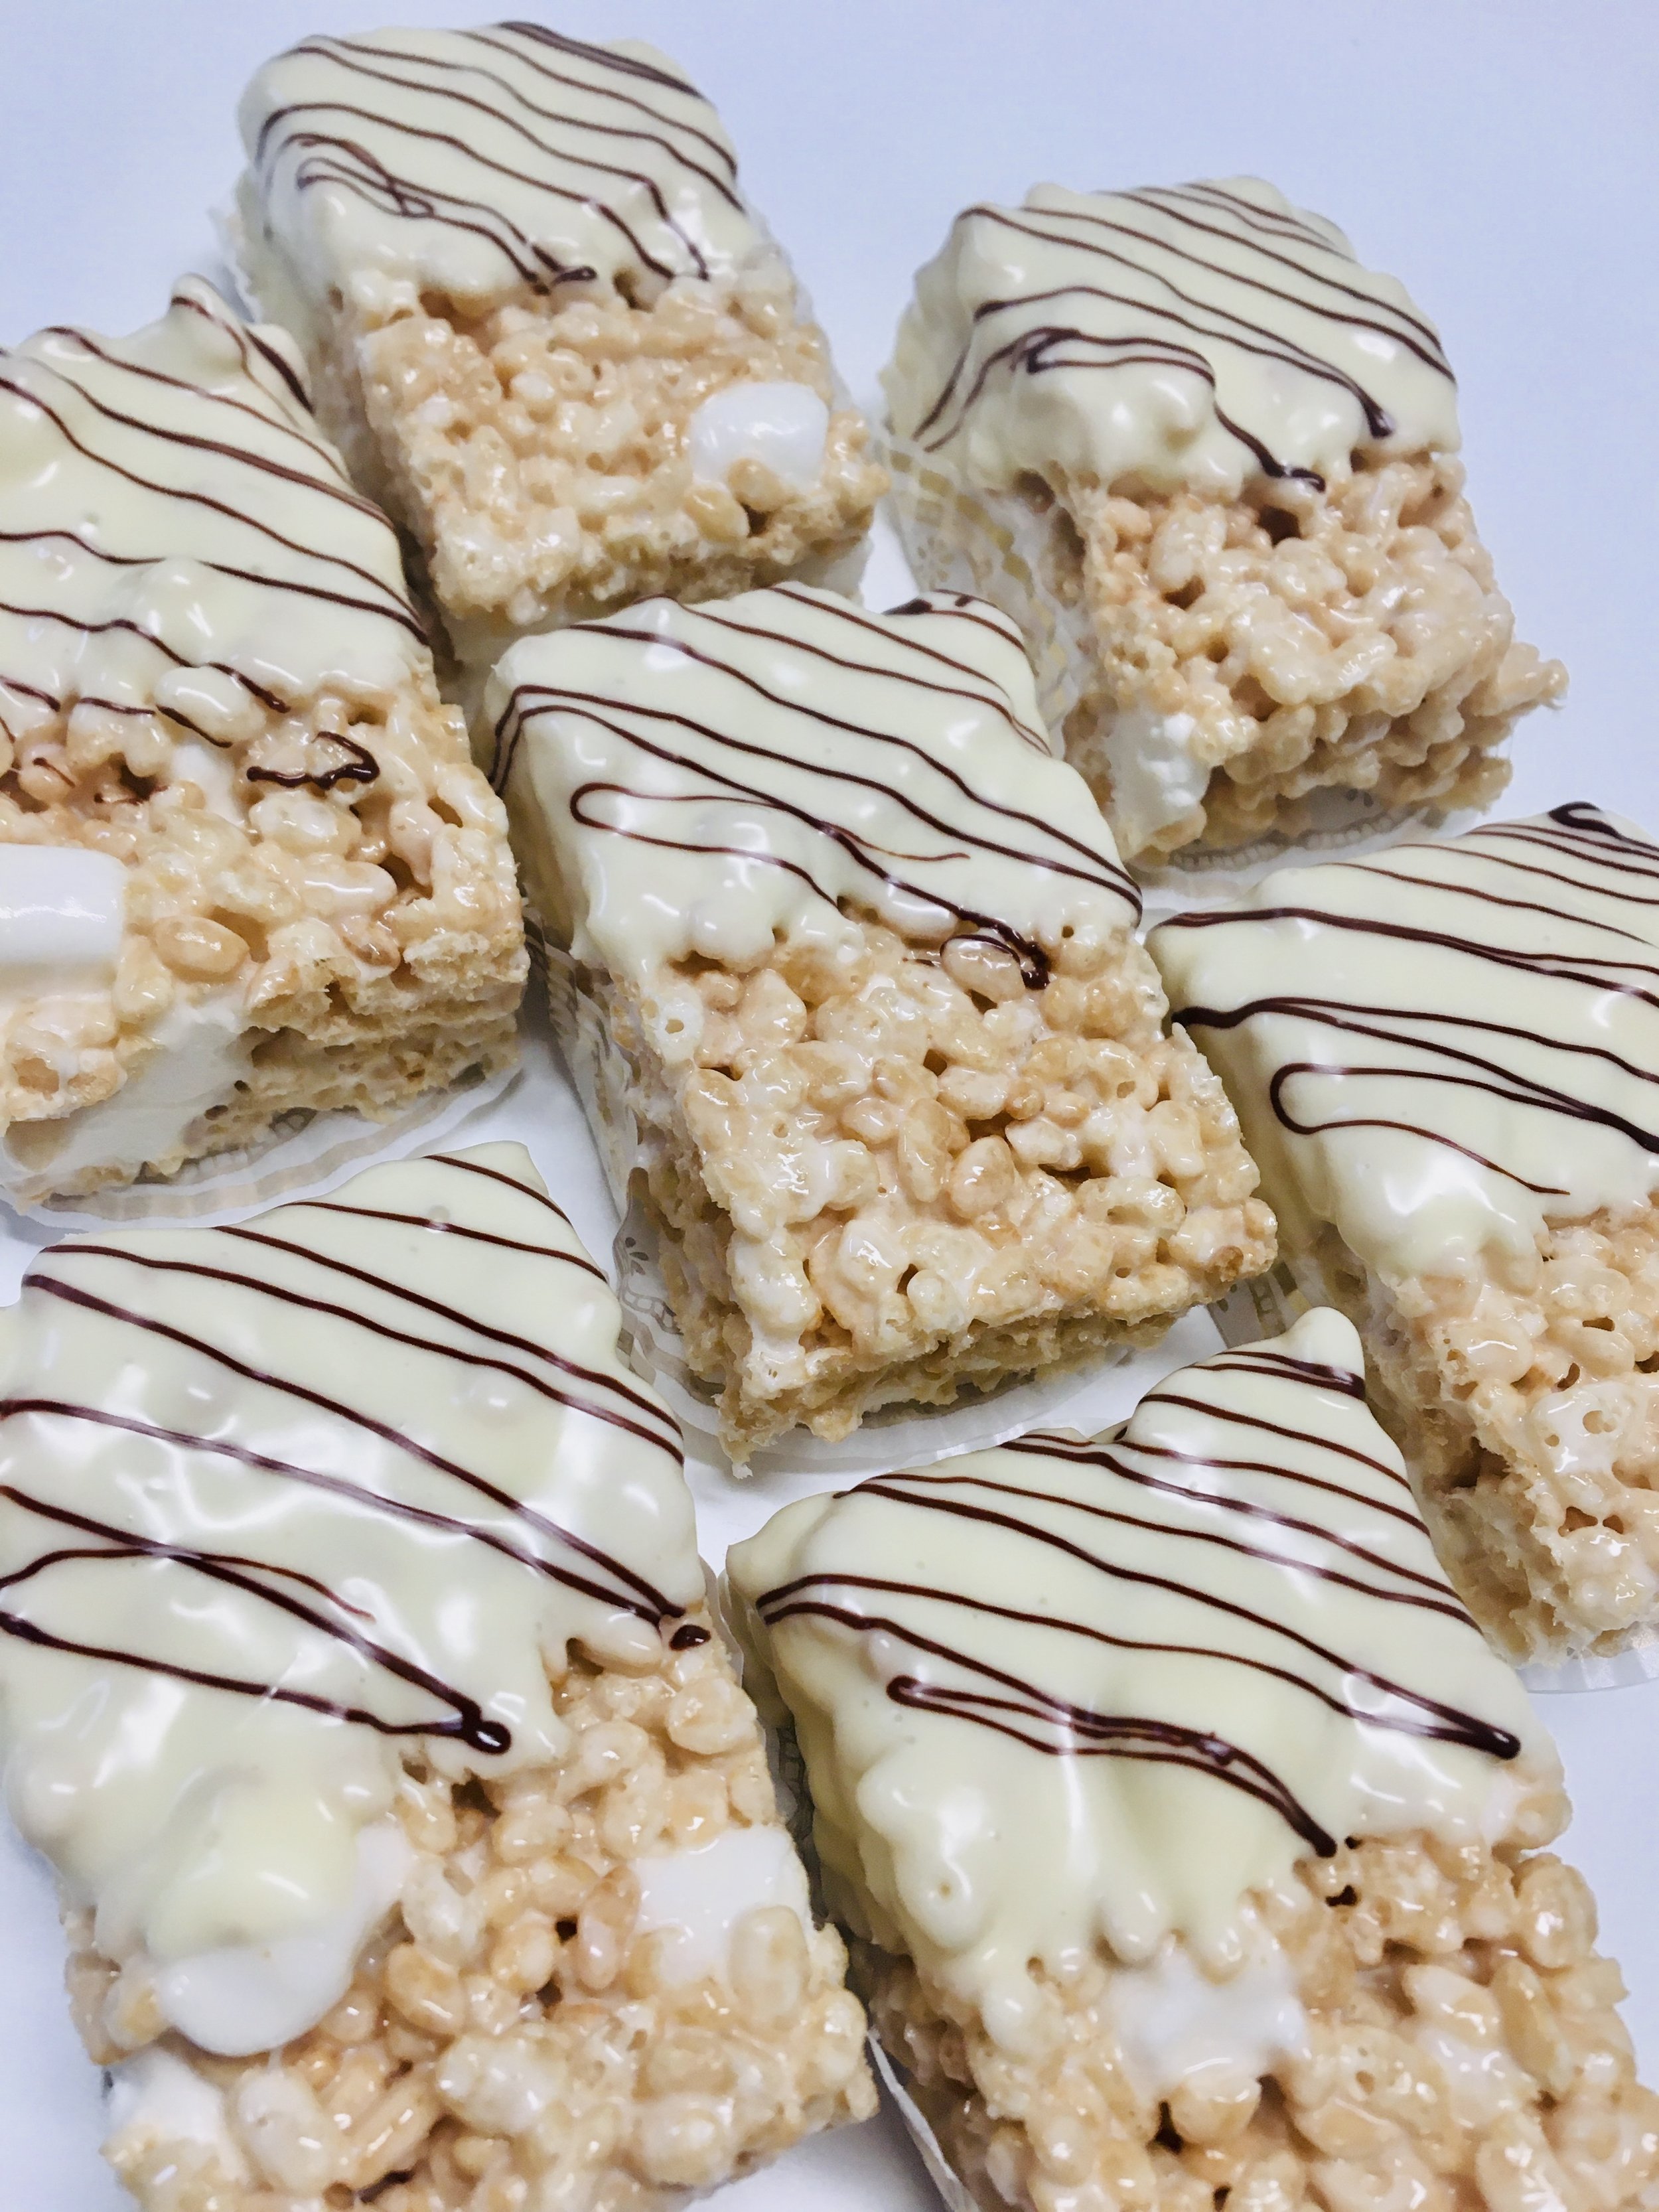 rice krispies - white with chocolate drizzle.jpeg